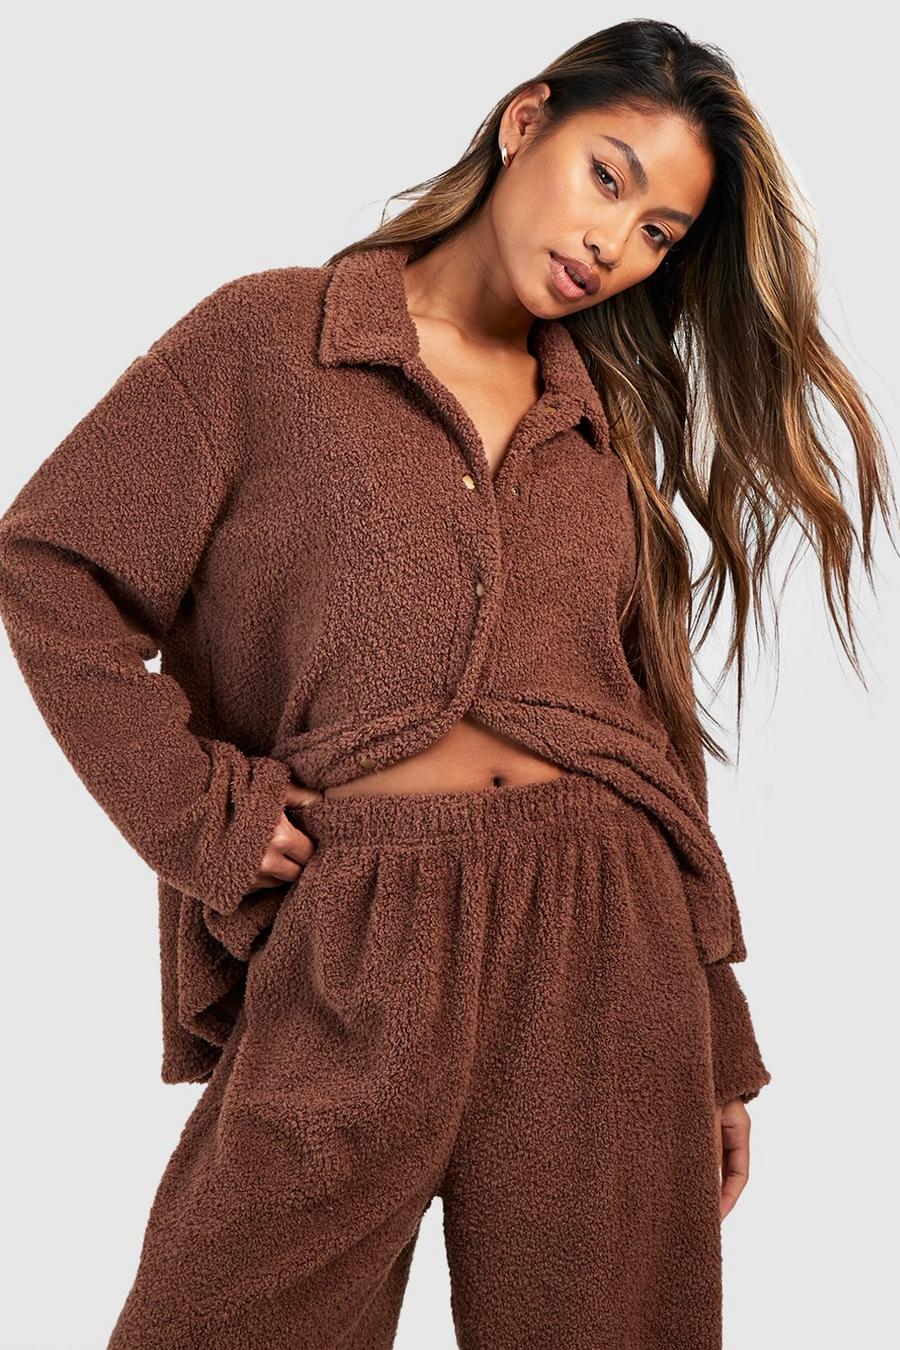 Women Cable Knitted 2 Piece Outfits Plus Size Off Shoulder Long Sleeve  Sweater Top and Pants Sets Fall Warm Loungewear